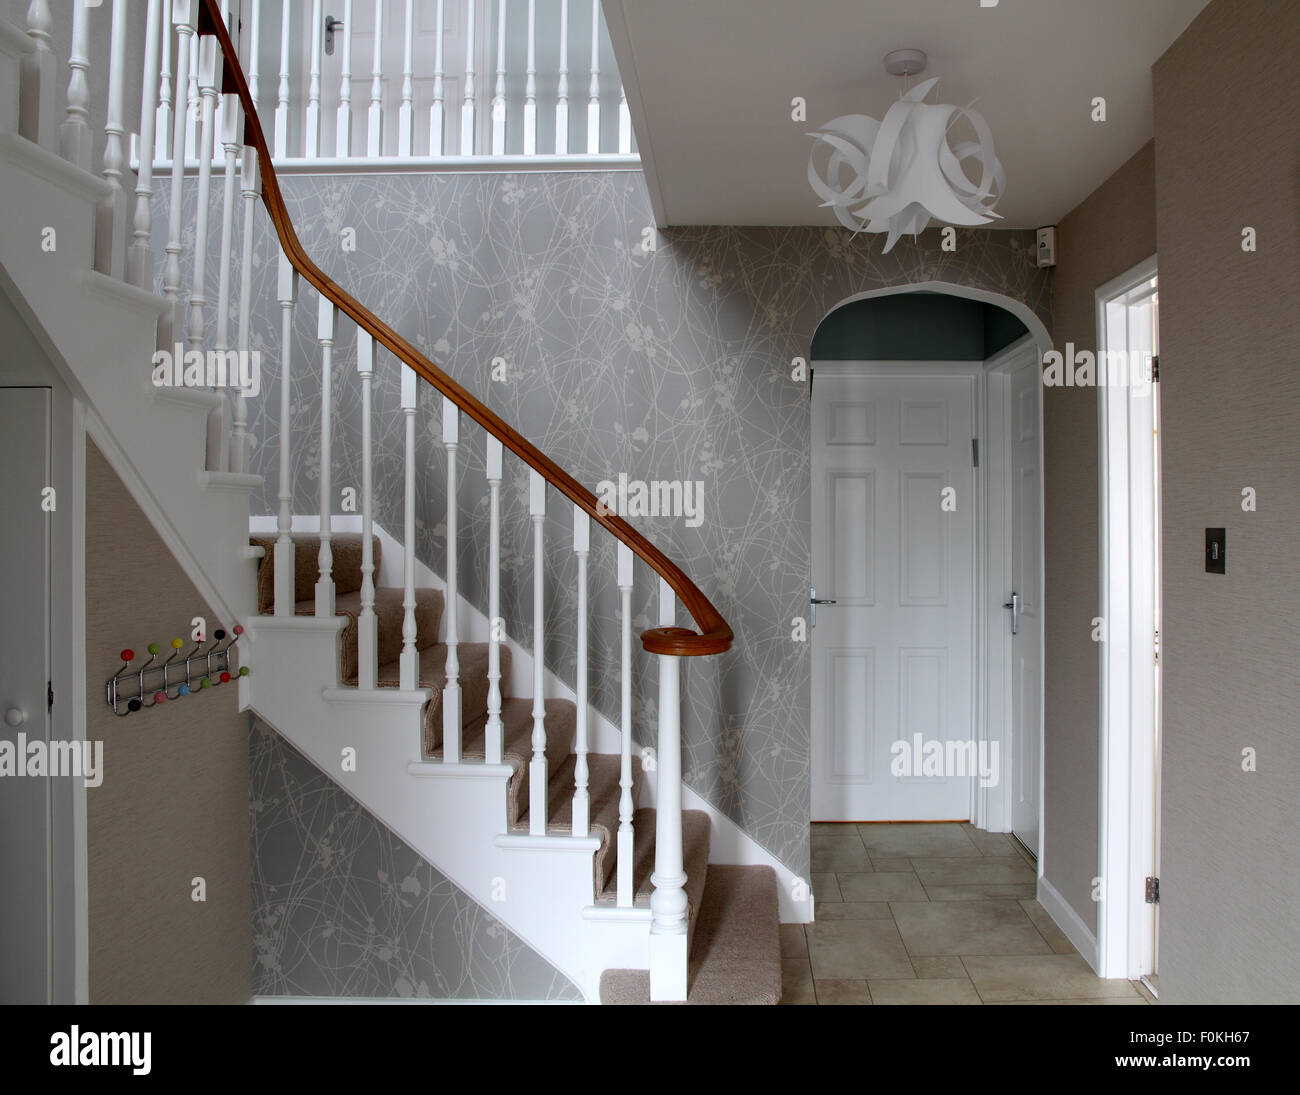 Hall with stairs, white doors, coat hangers and origami style ceiling lamp  shade Stock Photo - Alamy